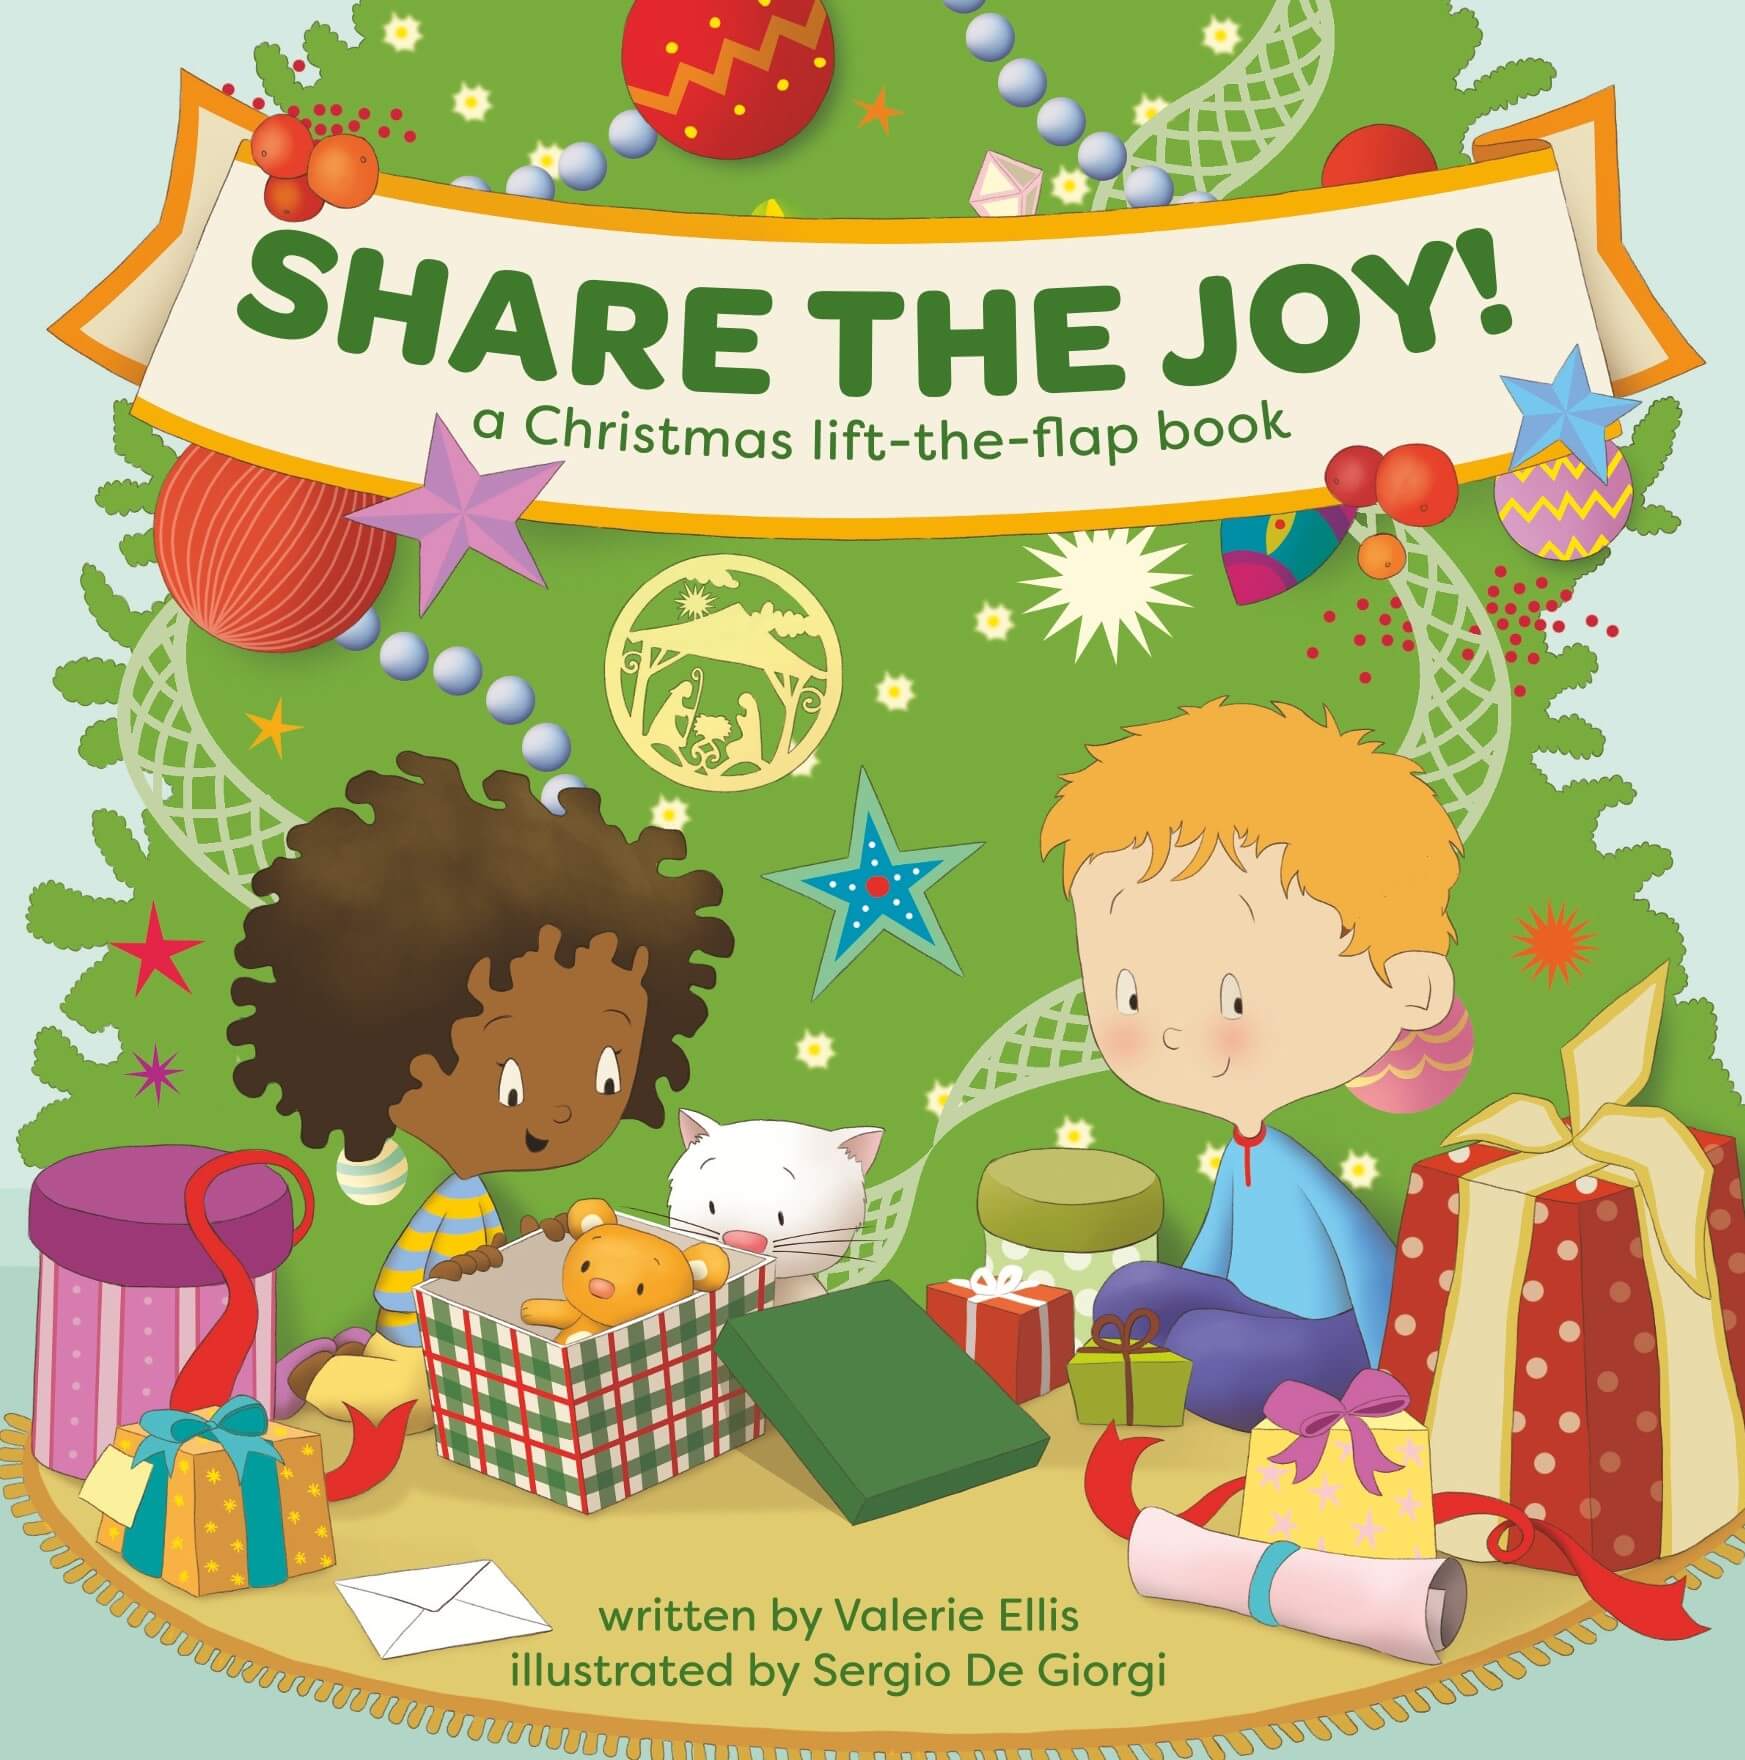 Share the Joy! A Christmas Lift-the-Flap Book - Children's Board Book Cover for Christmas showing two diverse children in front of the Christmas tree smiling and opening gifts - by Valerie Ellis and Sergio De Giorgi